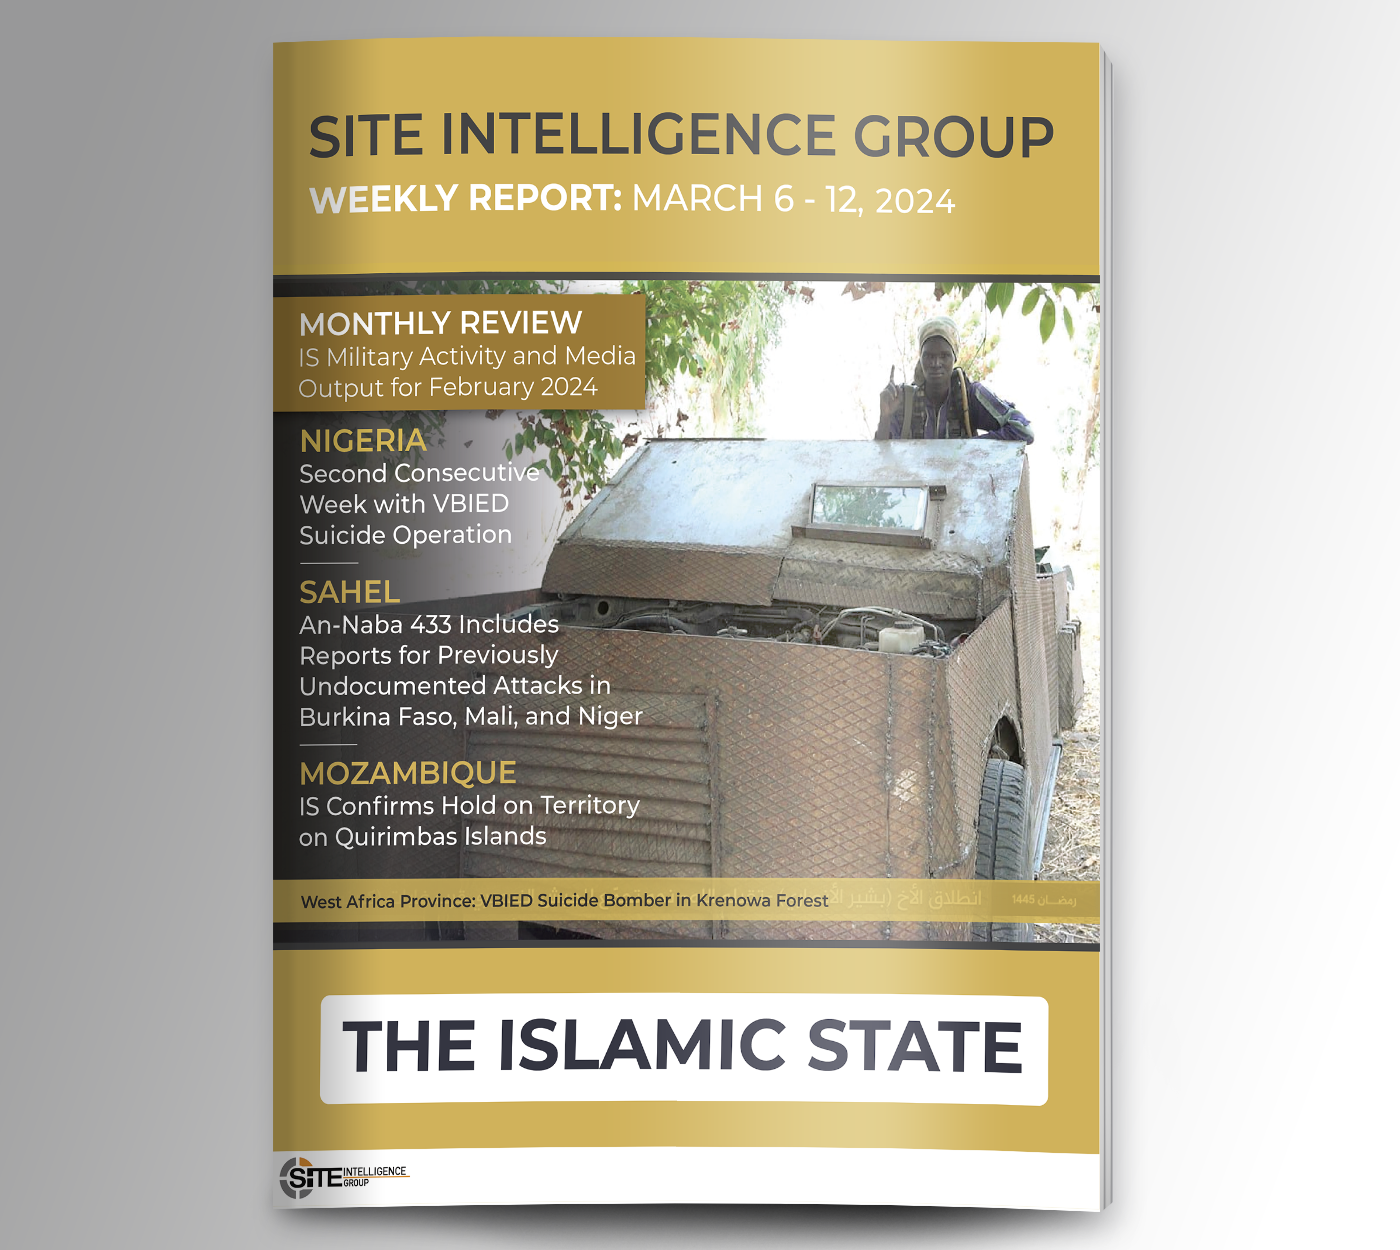 Weekly inSITE on the Islamic State for March 6-12, 2024